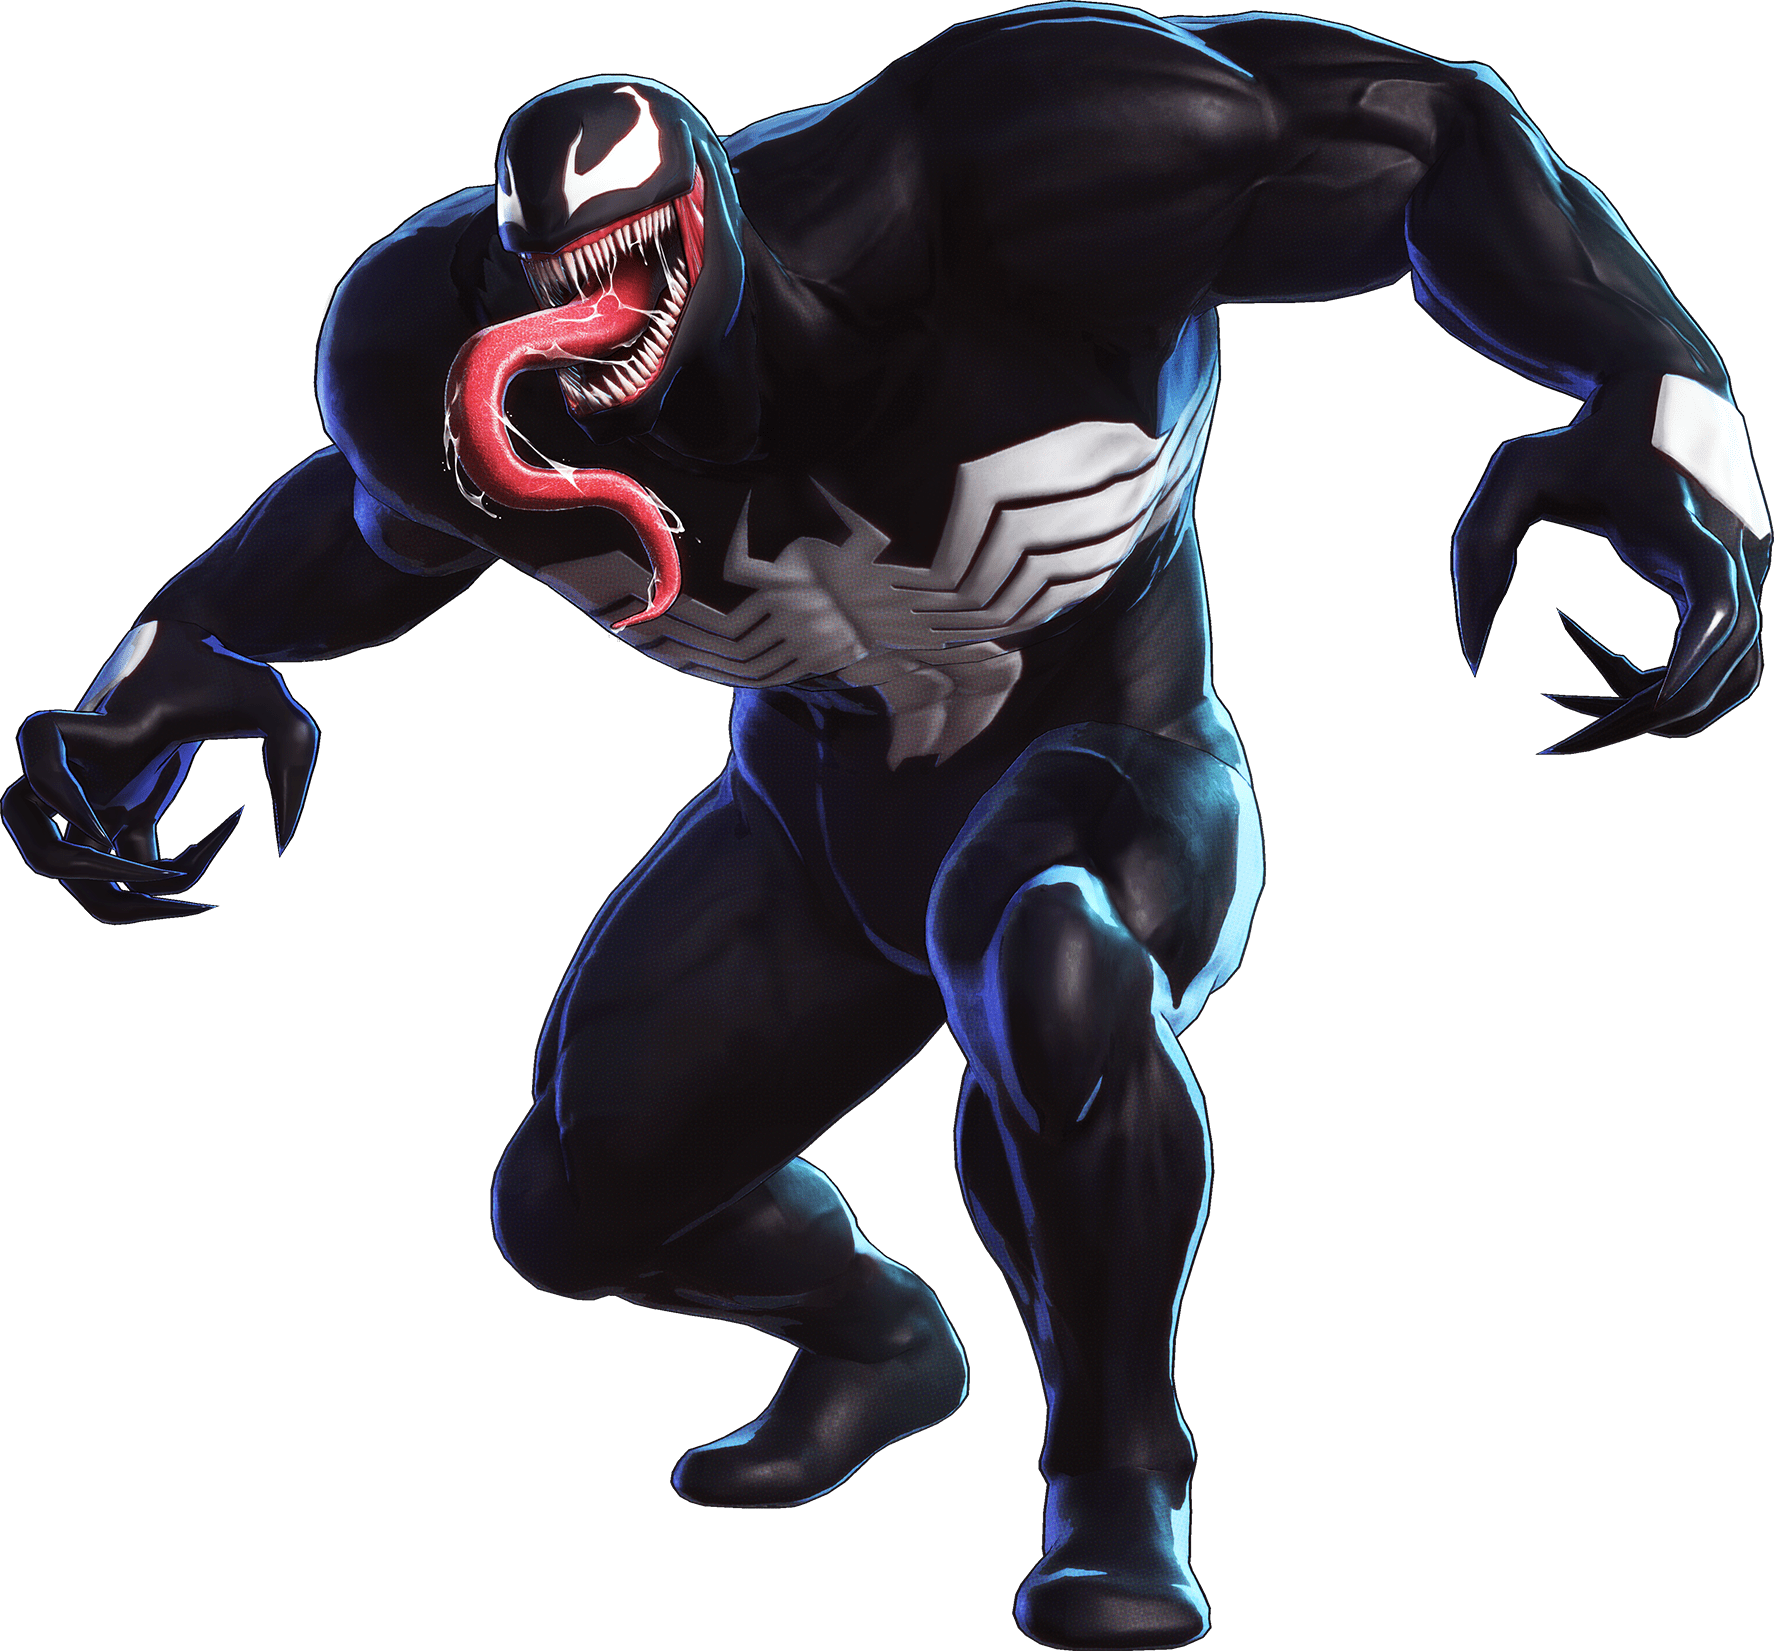 Venom download the new for apple